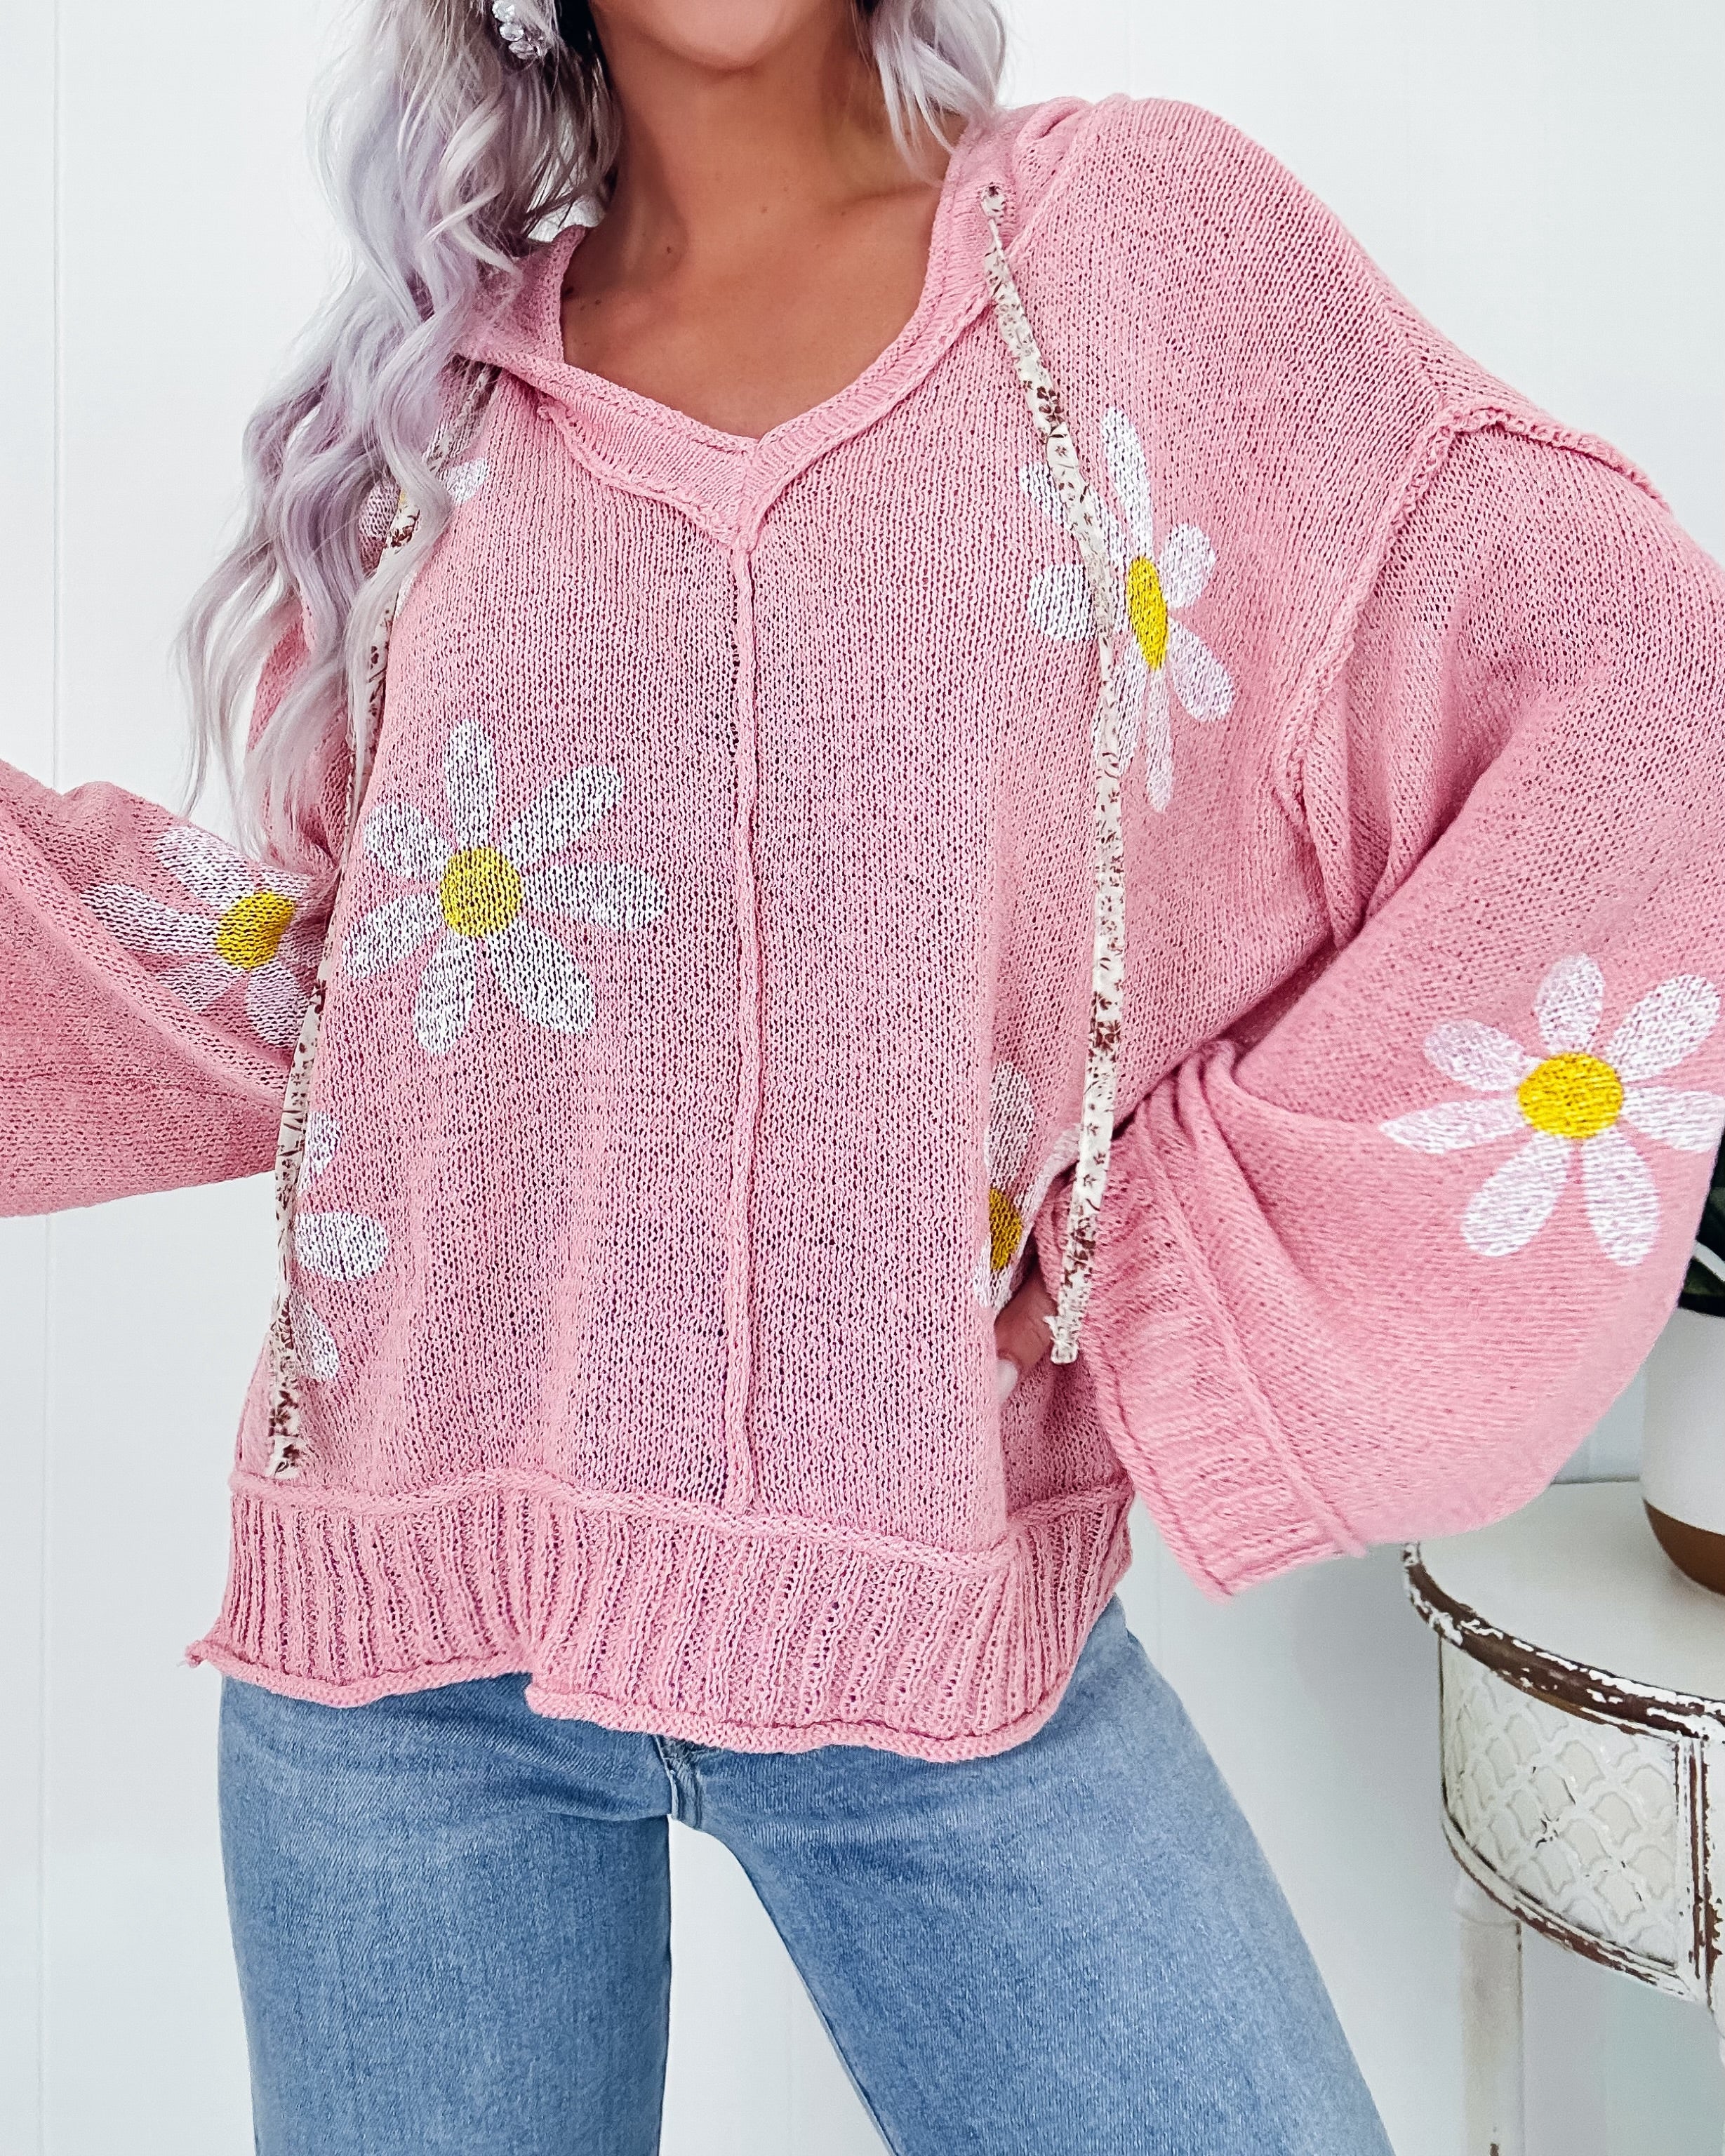 Floral Embrace Knit Hooded Sweater - Mauve